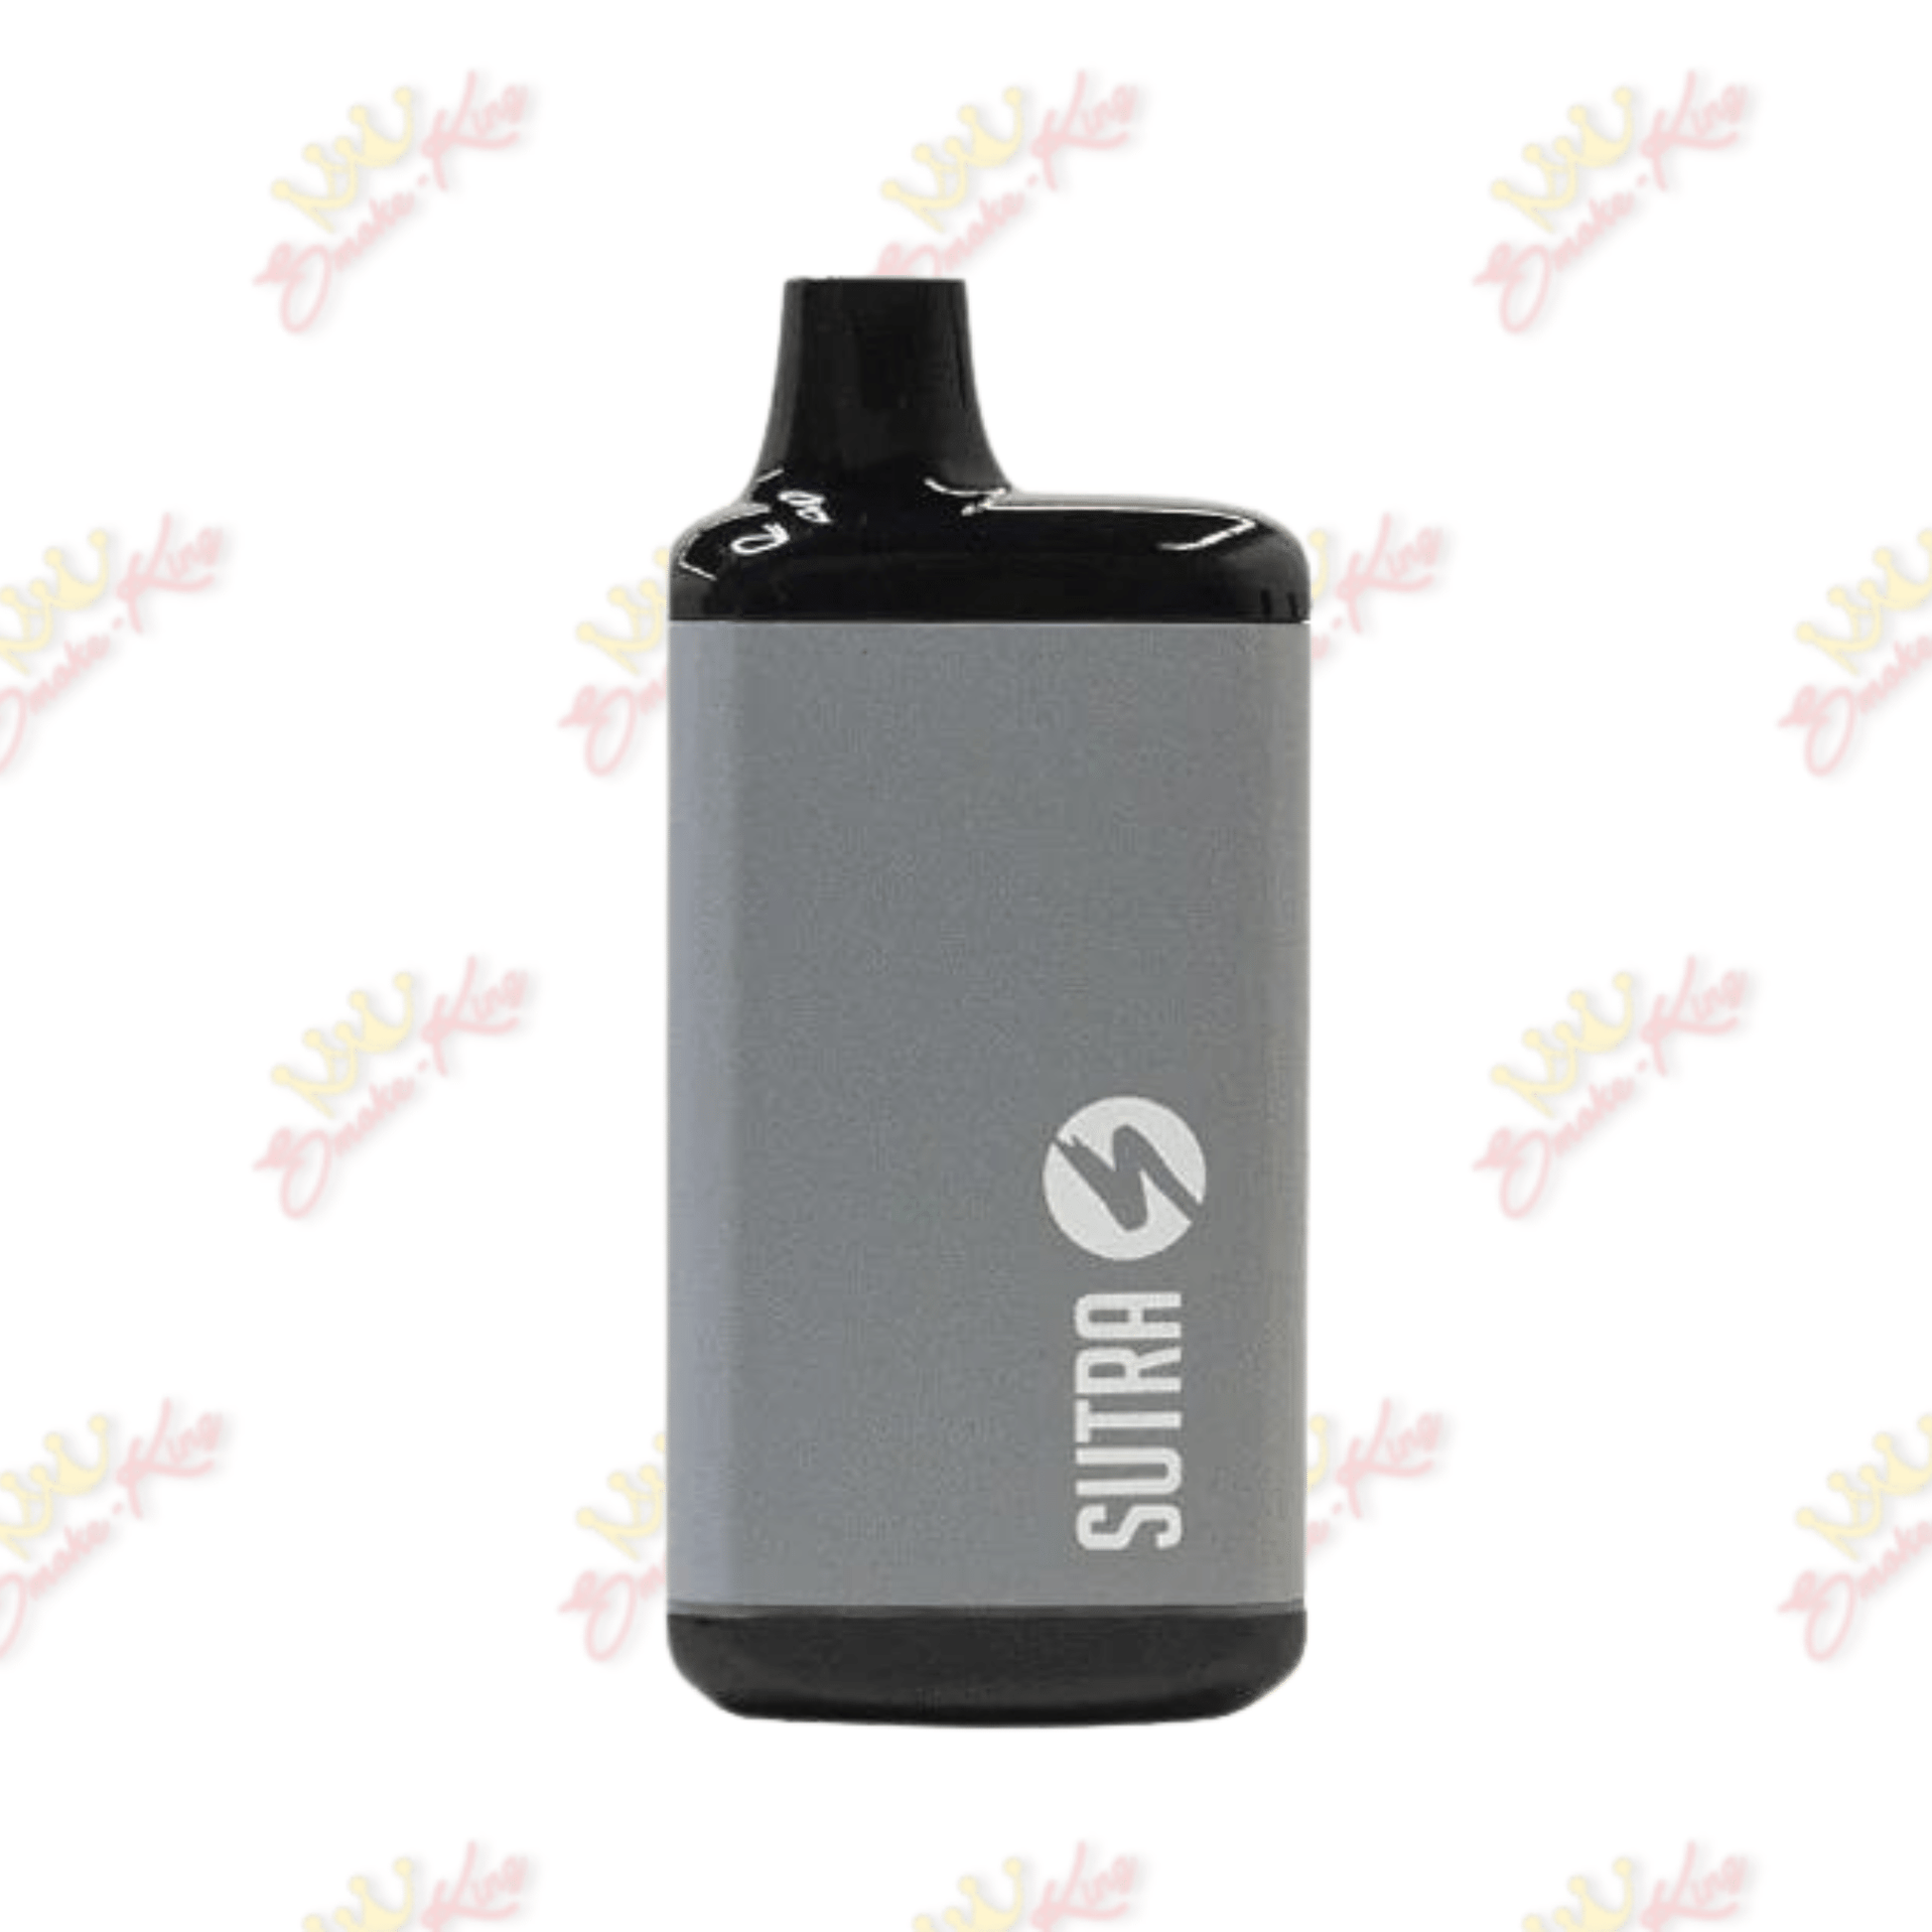 Sutra Silver Sutra Silo Pro Discreet Battery Sutra Silo Pro Discreet Battery | 510 Cartridge Battery | Smoke King